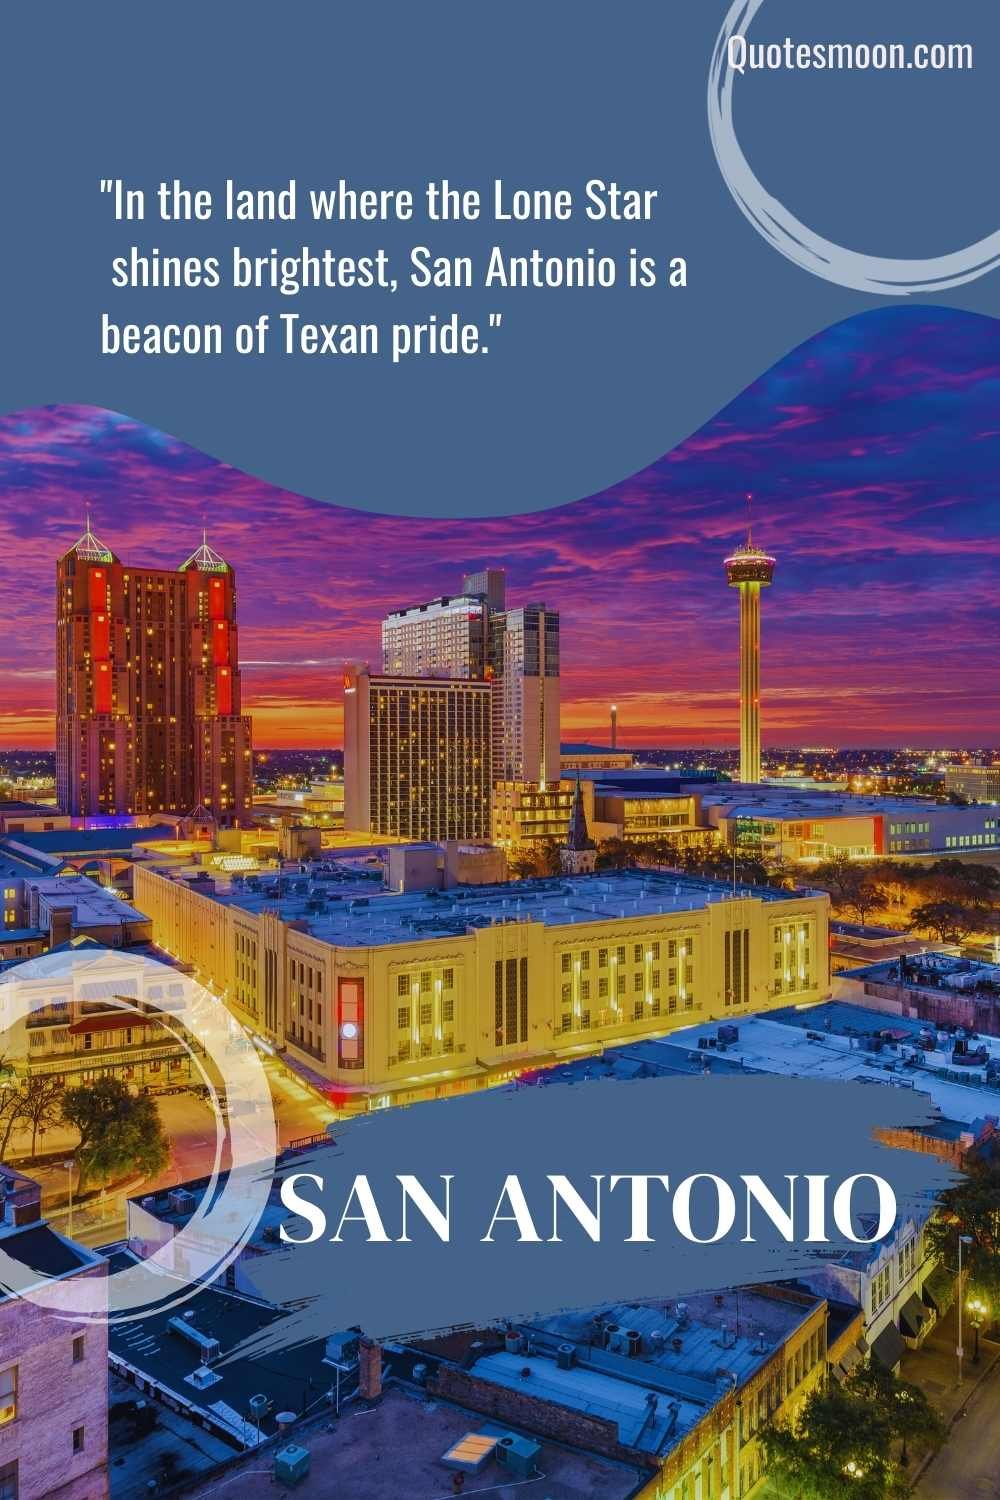 San Antonio Texas Quotes with images HD